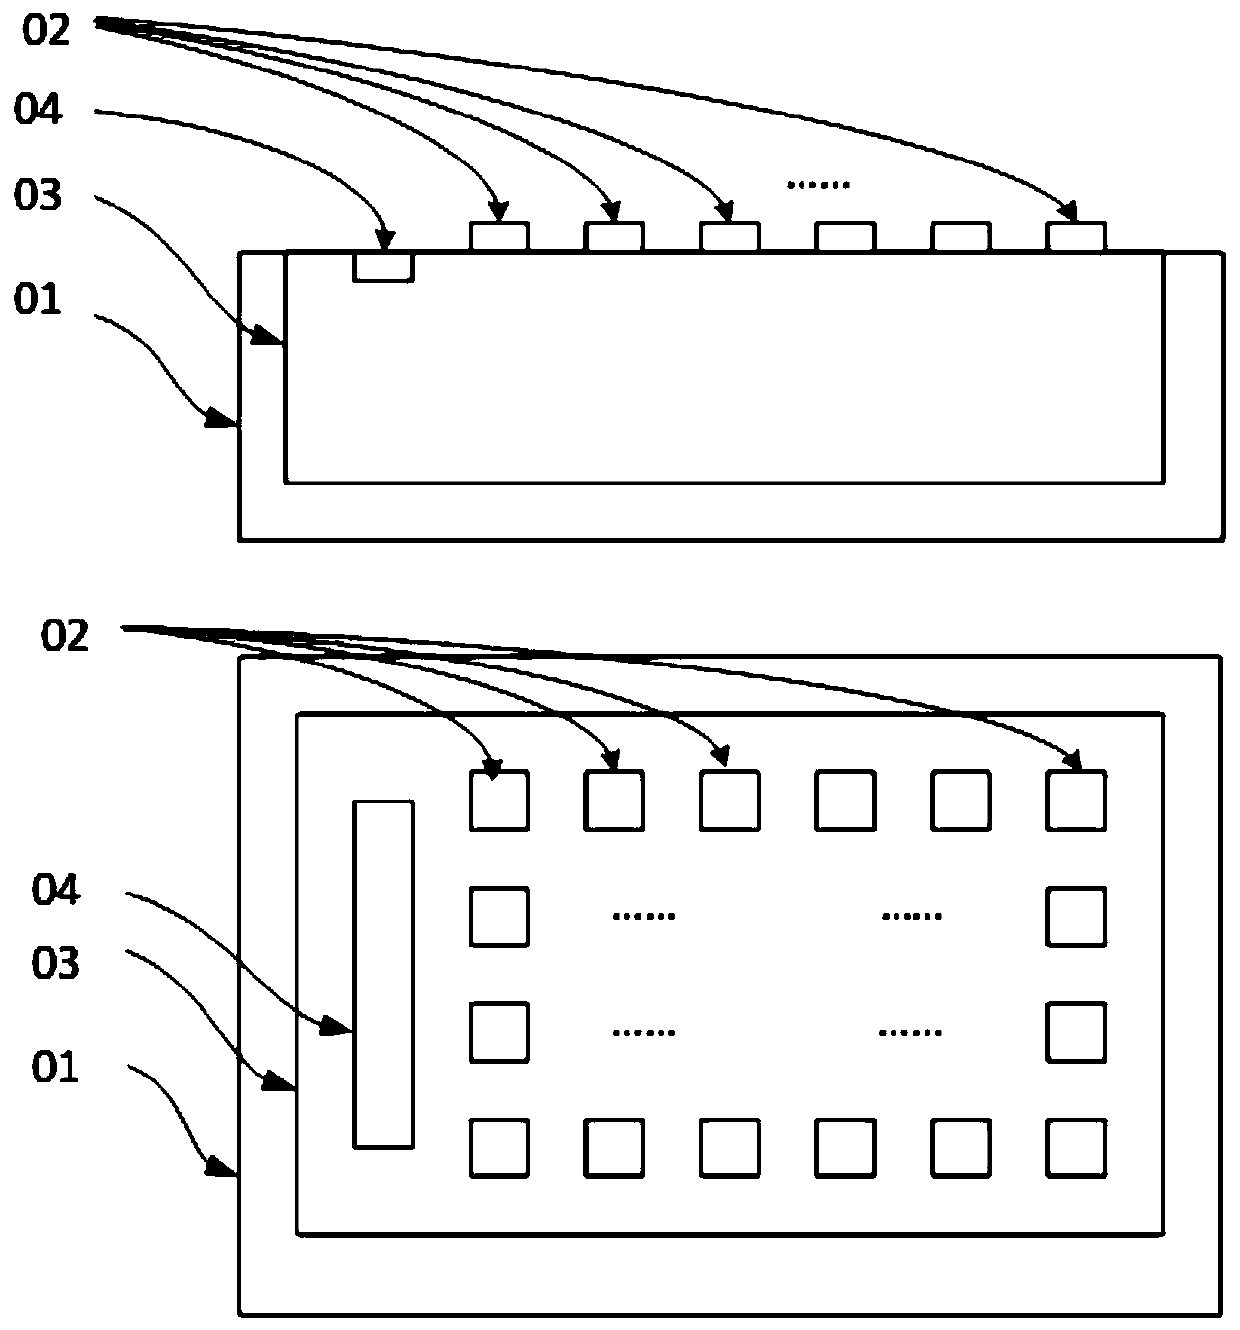 A silicon-based display based on fusion scanning strategy